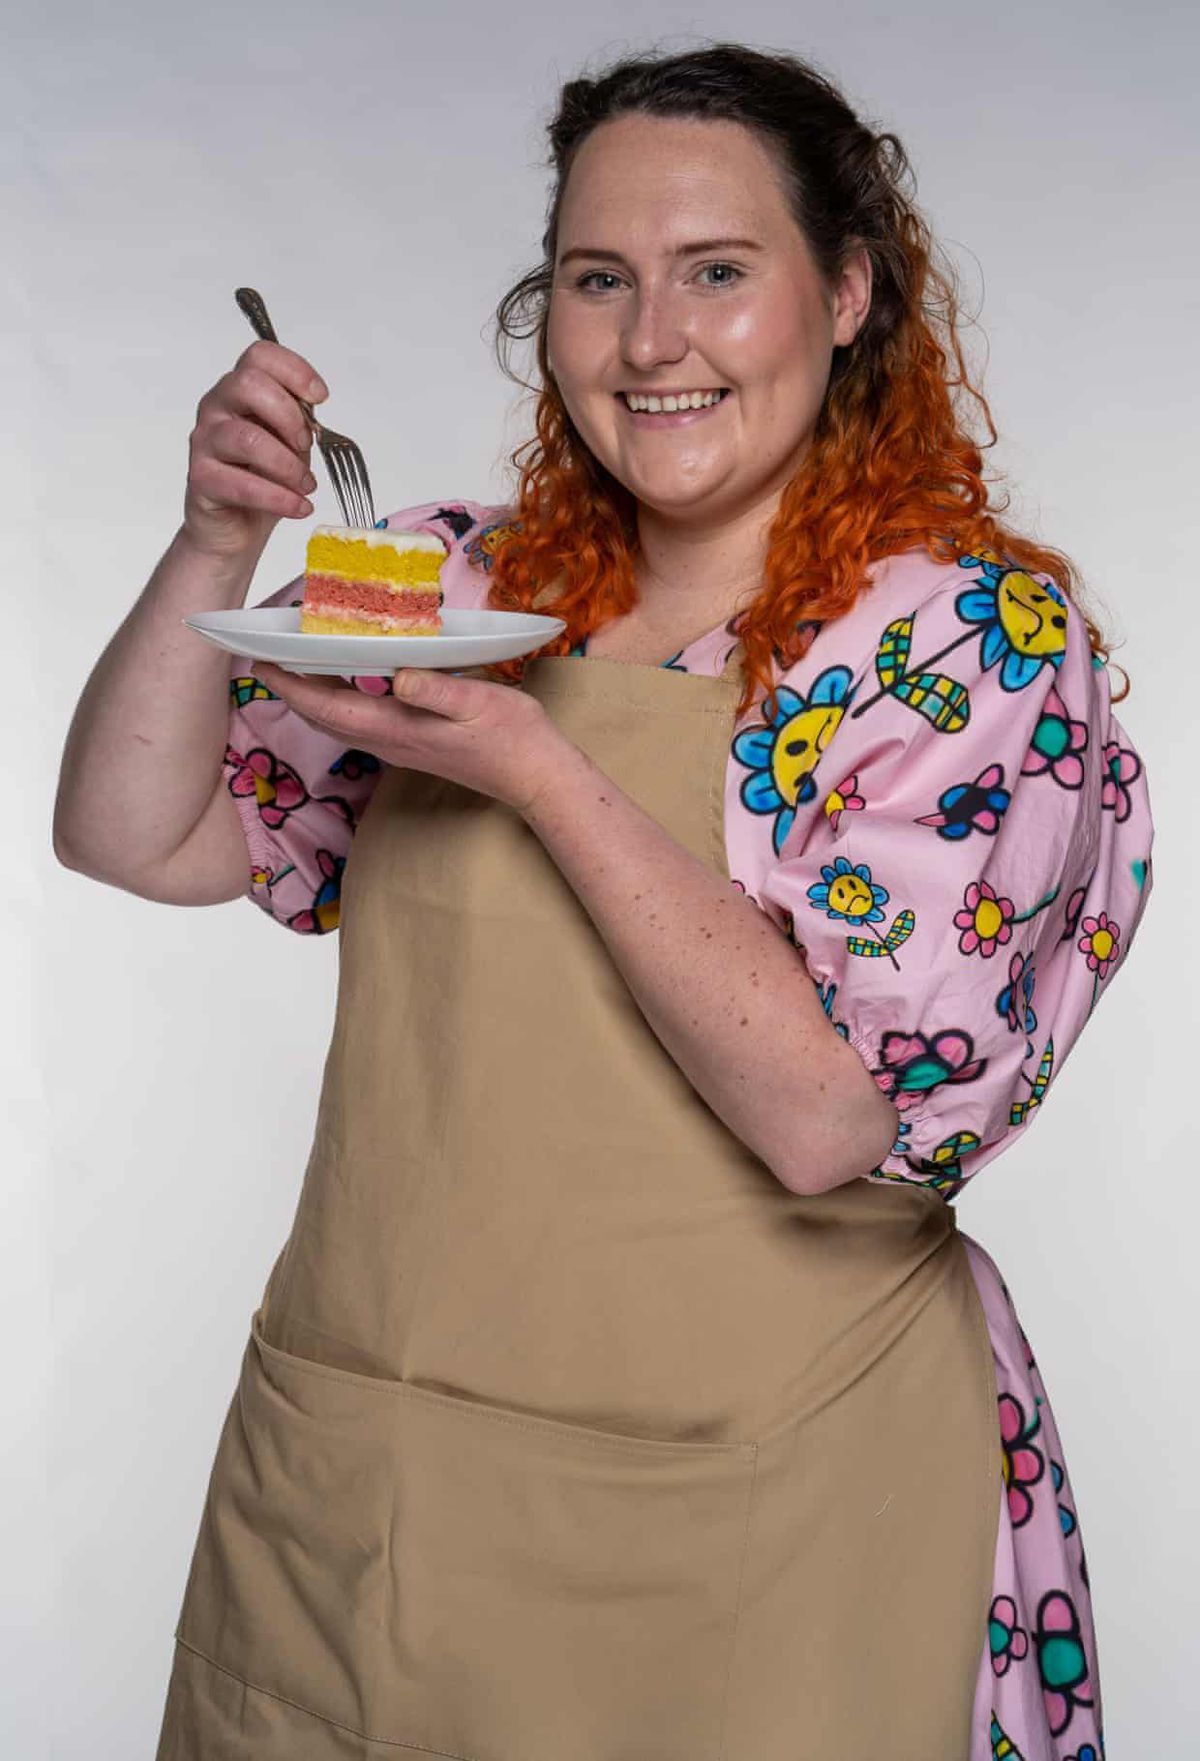 Great British Bake Off 2021 contestant Lizzie, who will compete on GBBO this year